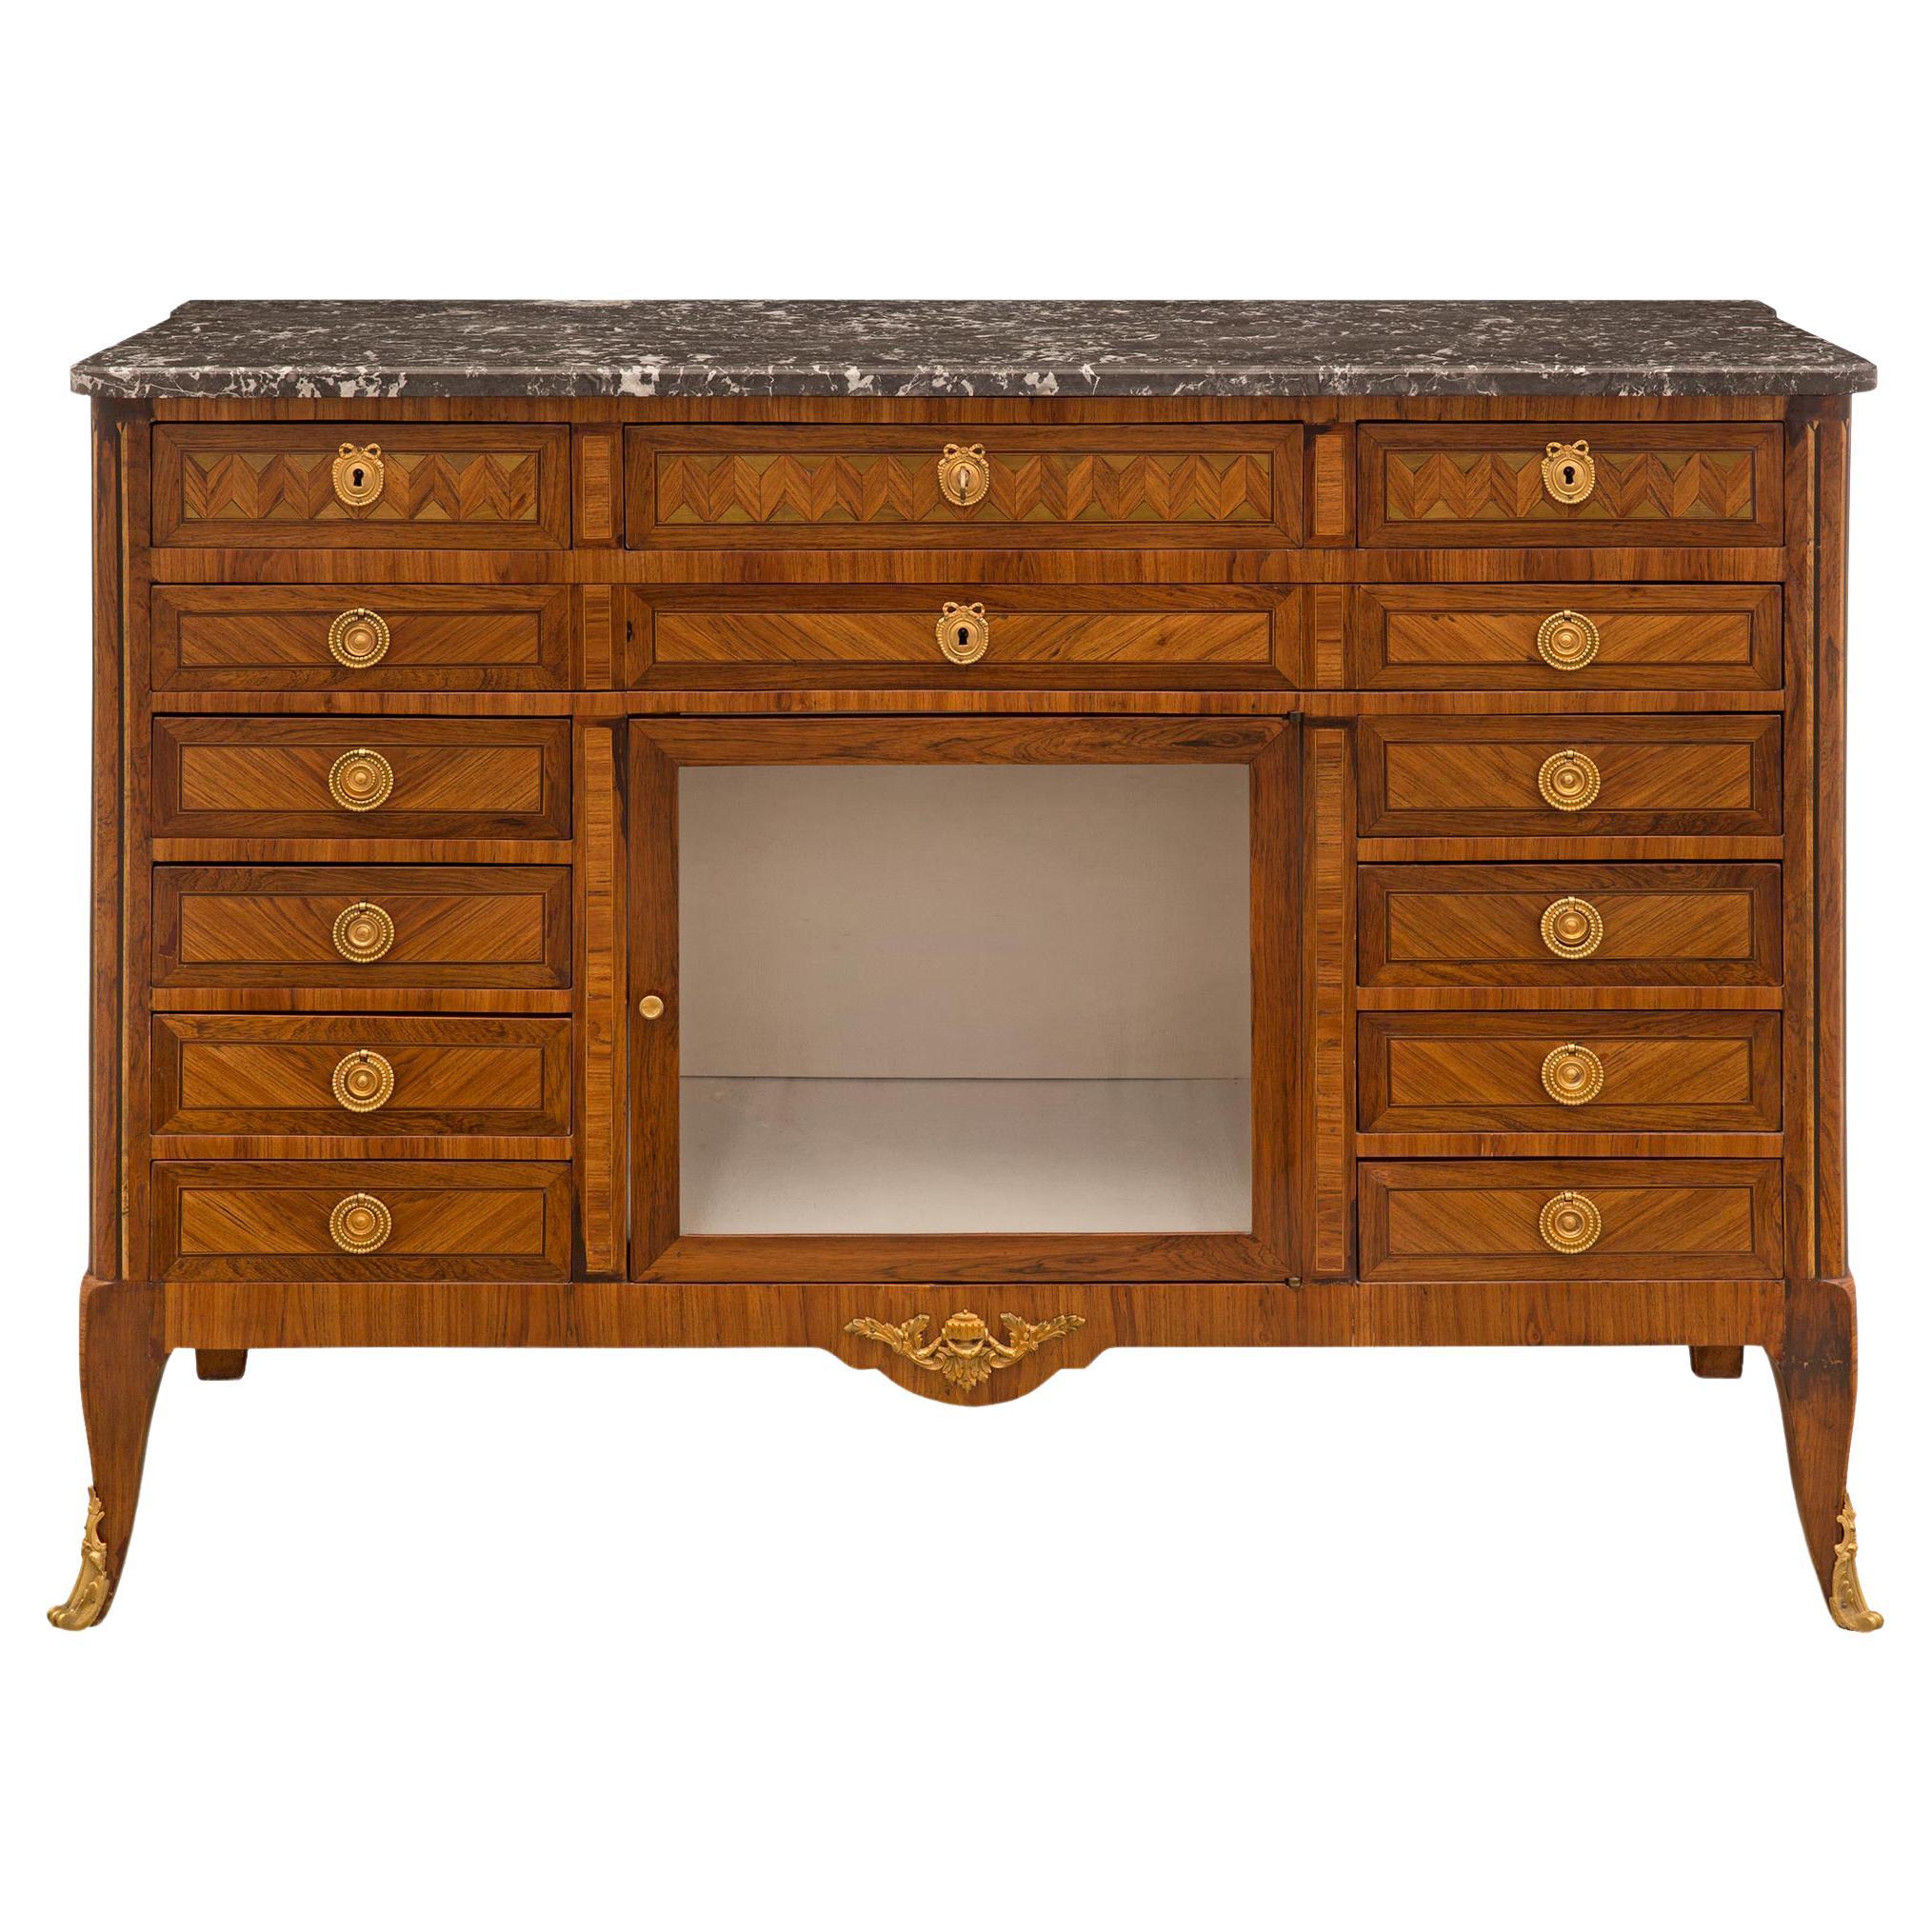 French Mid-19th Century Transitional St. Buffet Vitrine, Circa 1840 For Sale